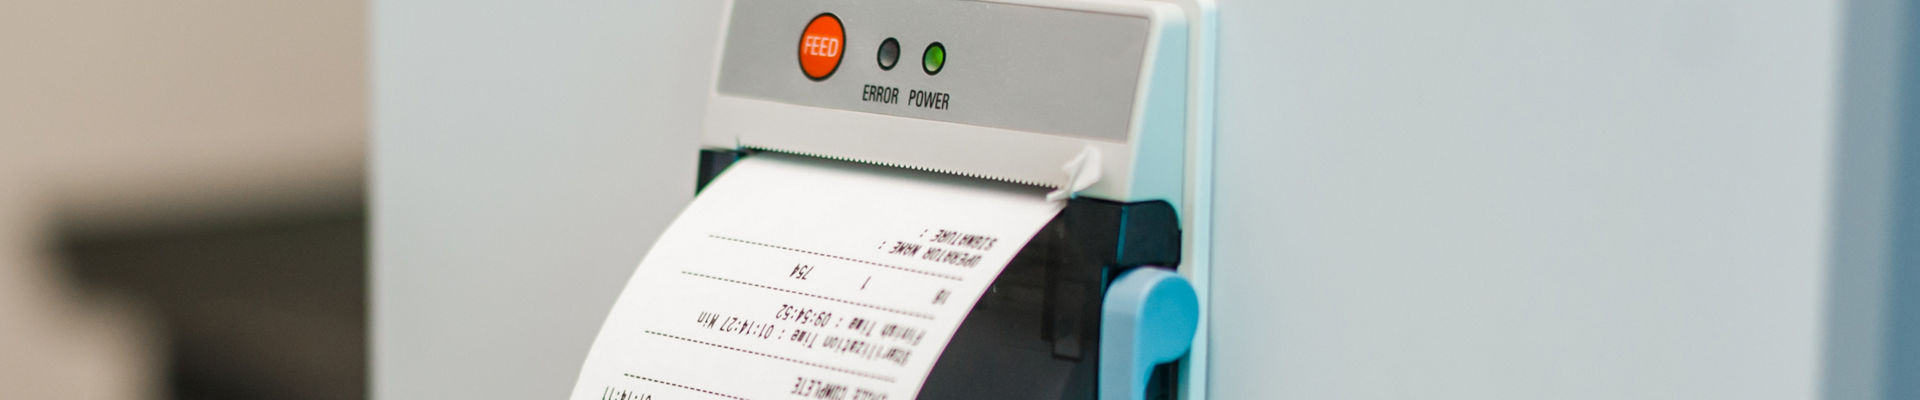 Machine printing a receipt on thermal paper 